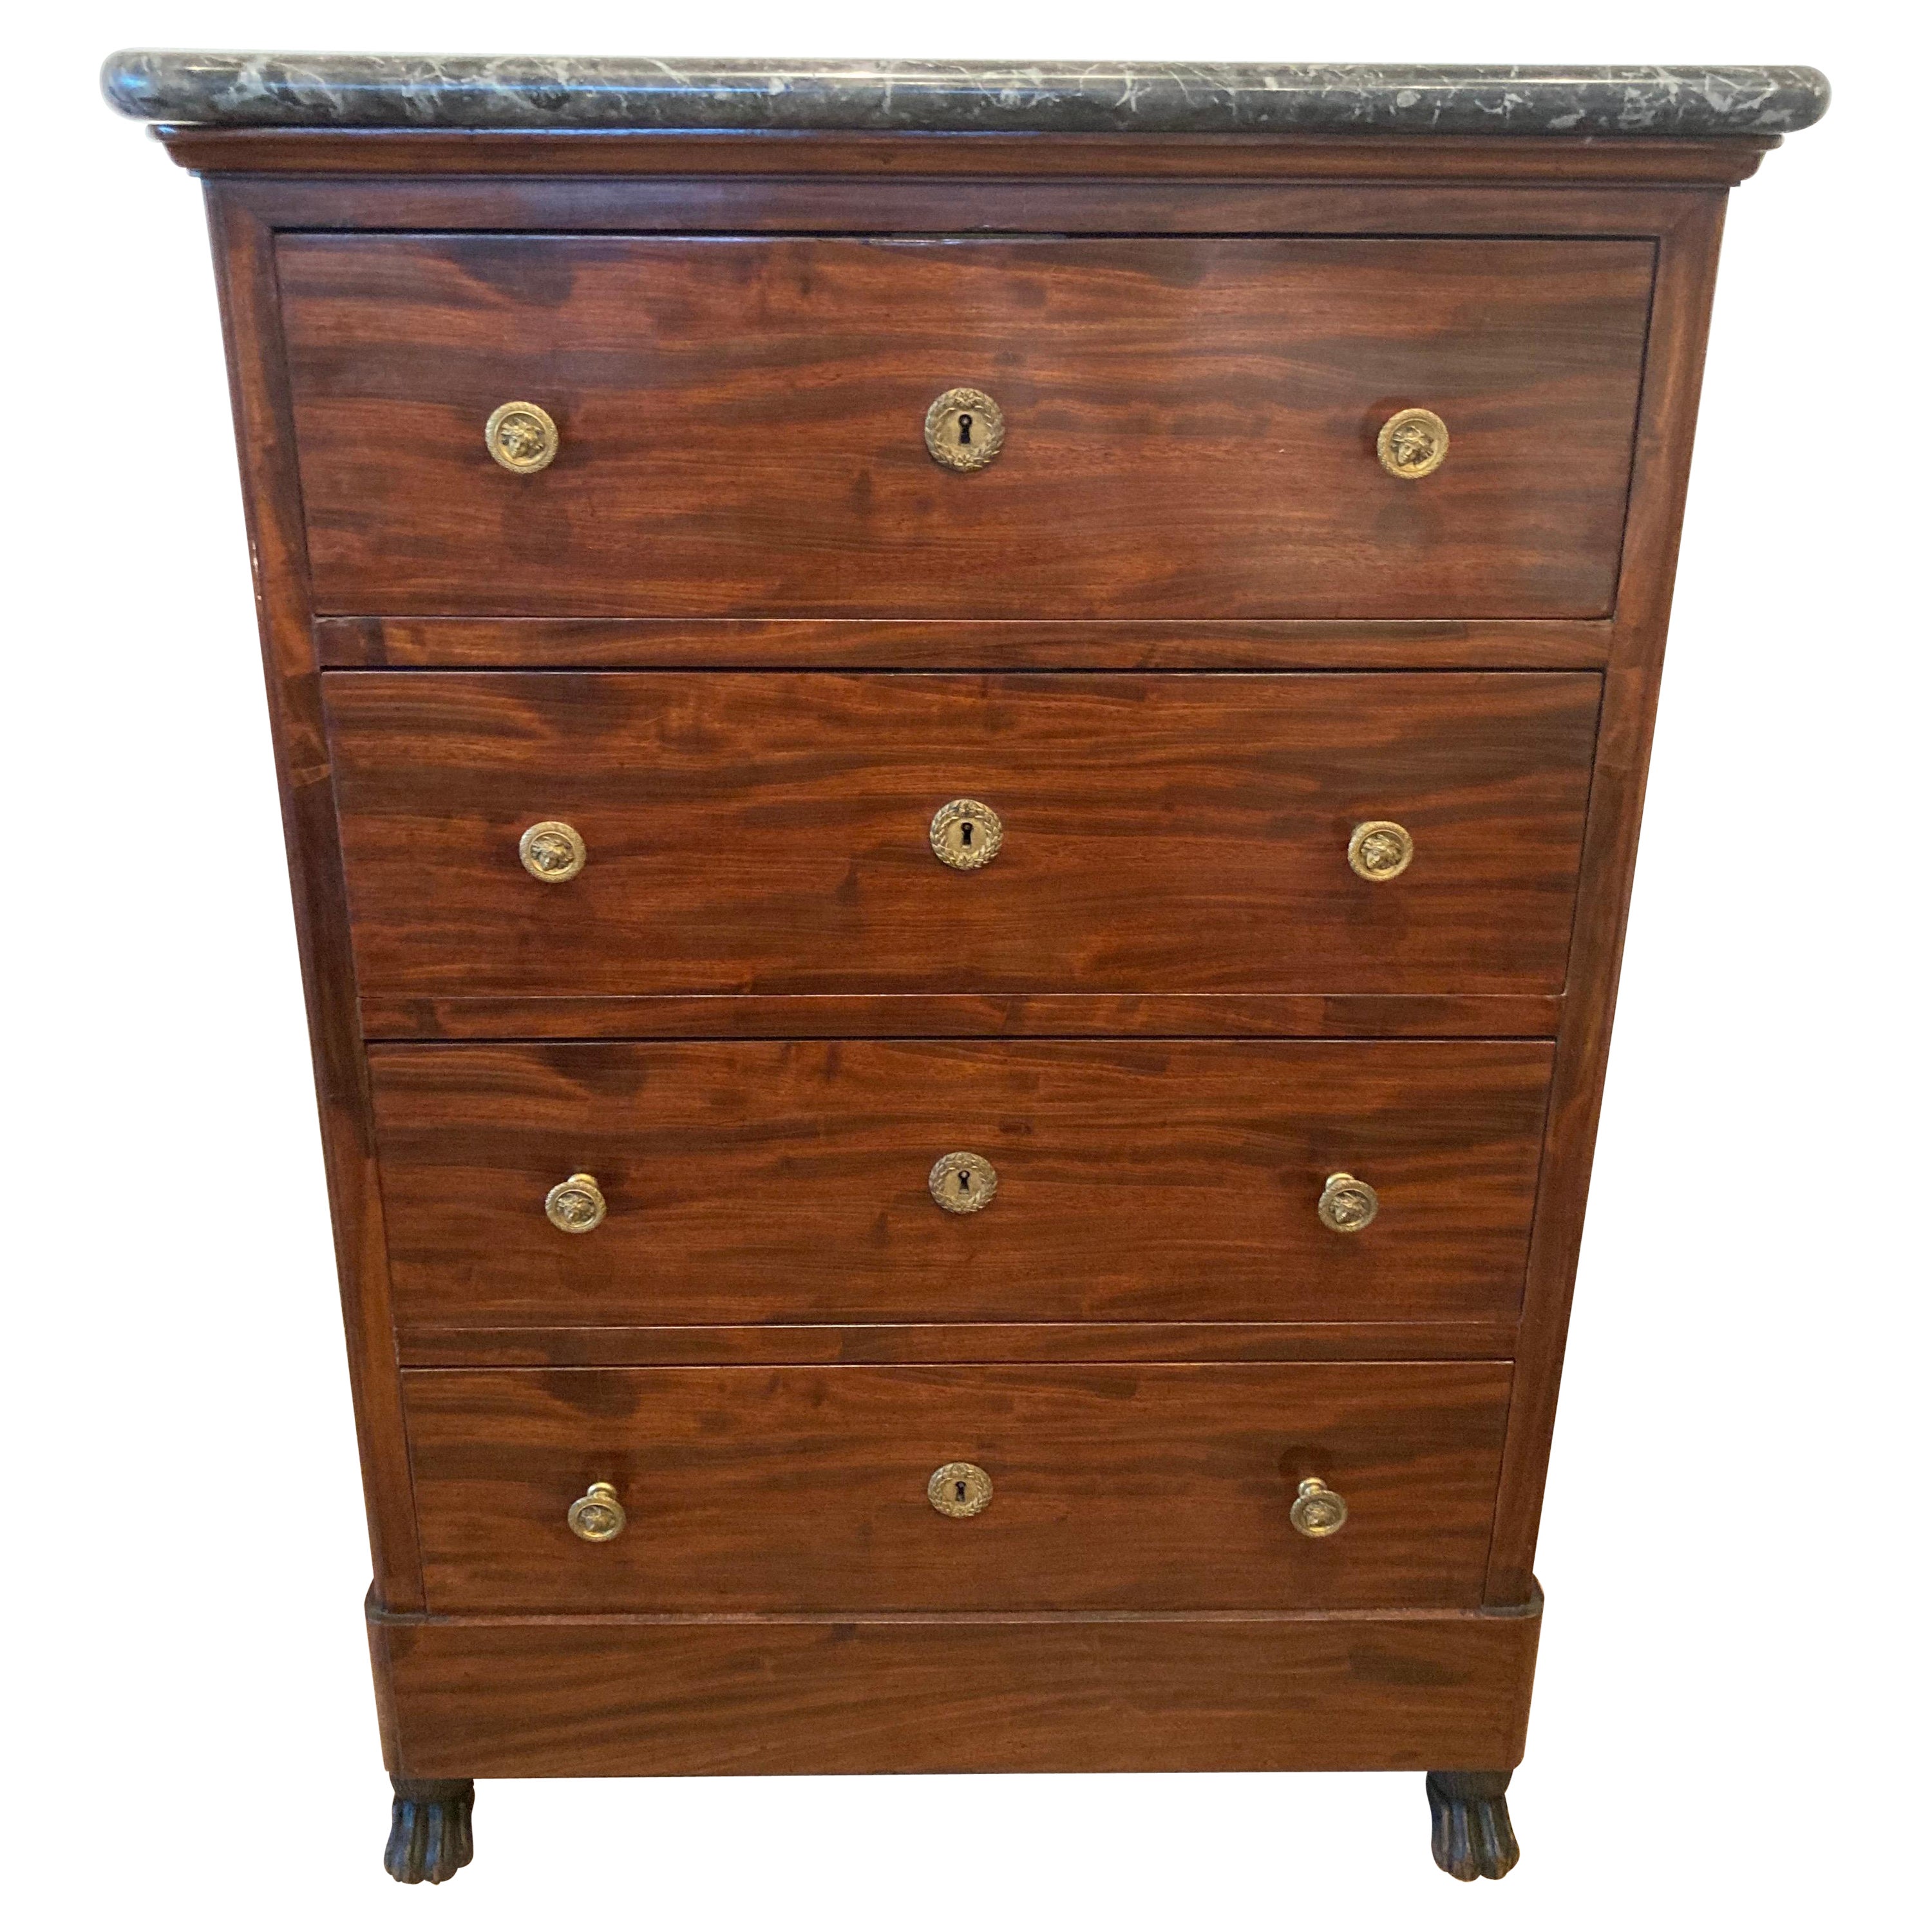 19th C. Jacob Chest of Drawers